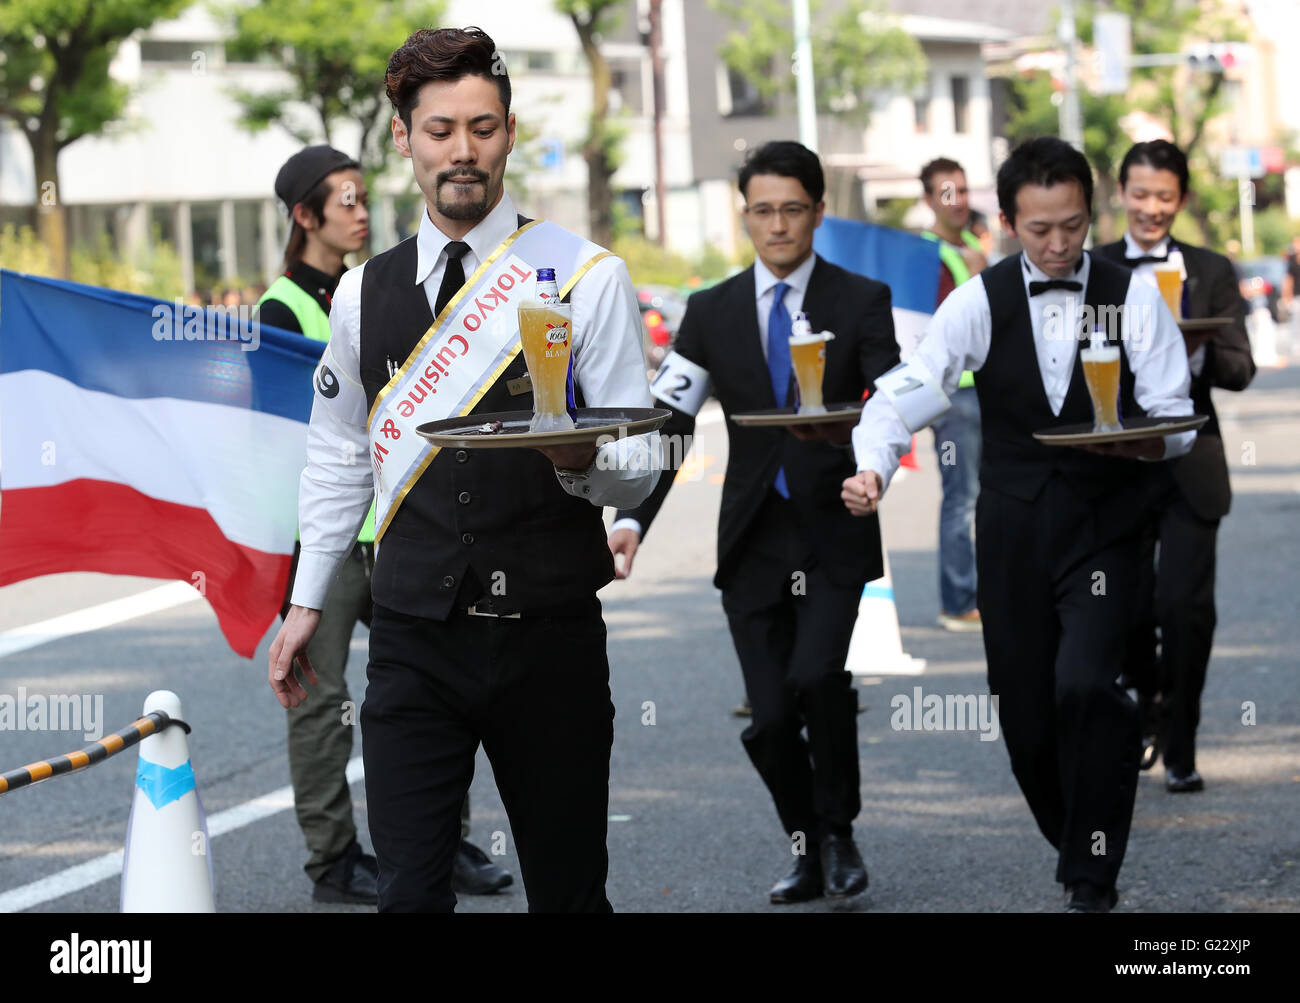 Tokyo, Japan. 22nd May, 2016. Waiters carry glasses of beer on the trays during the 'garcon carry race' in Tokyo on Sunday, May 22, 2016 as a part of 'Aperitif 365' event. 46 contestants from restaurants and cafes participated the beer carry race vying for the first prize of 300,000 yen, sponsored by French beer Kronenbourg. © Yoshio Tsunoda/AFLO/Alamy Live News Stock Photo